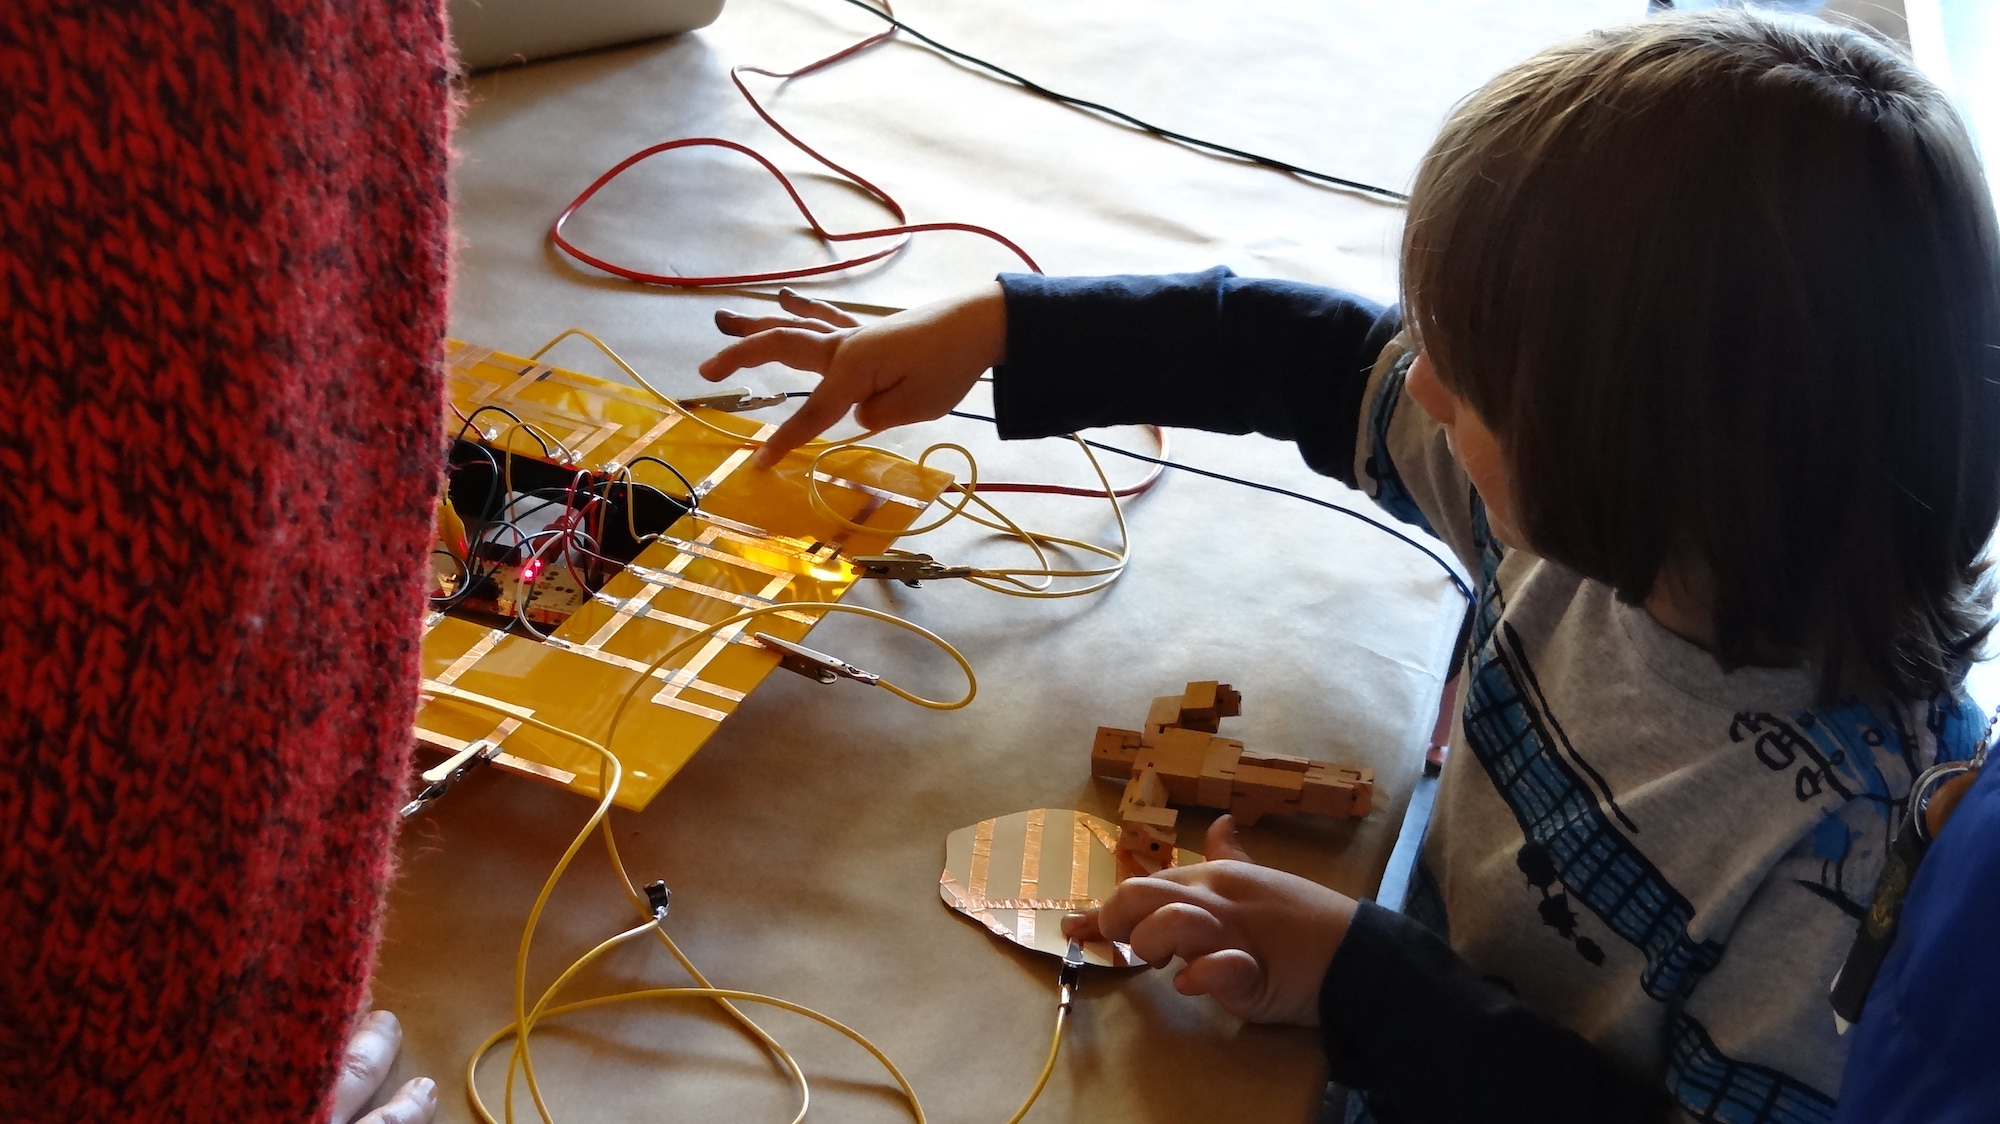 a young child using their finger to play with conductive circuits